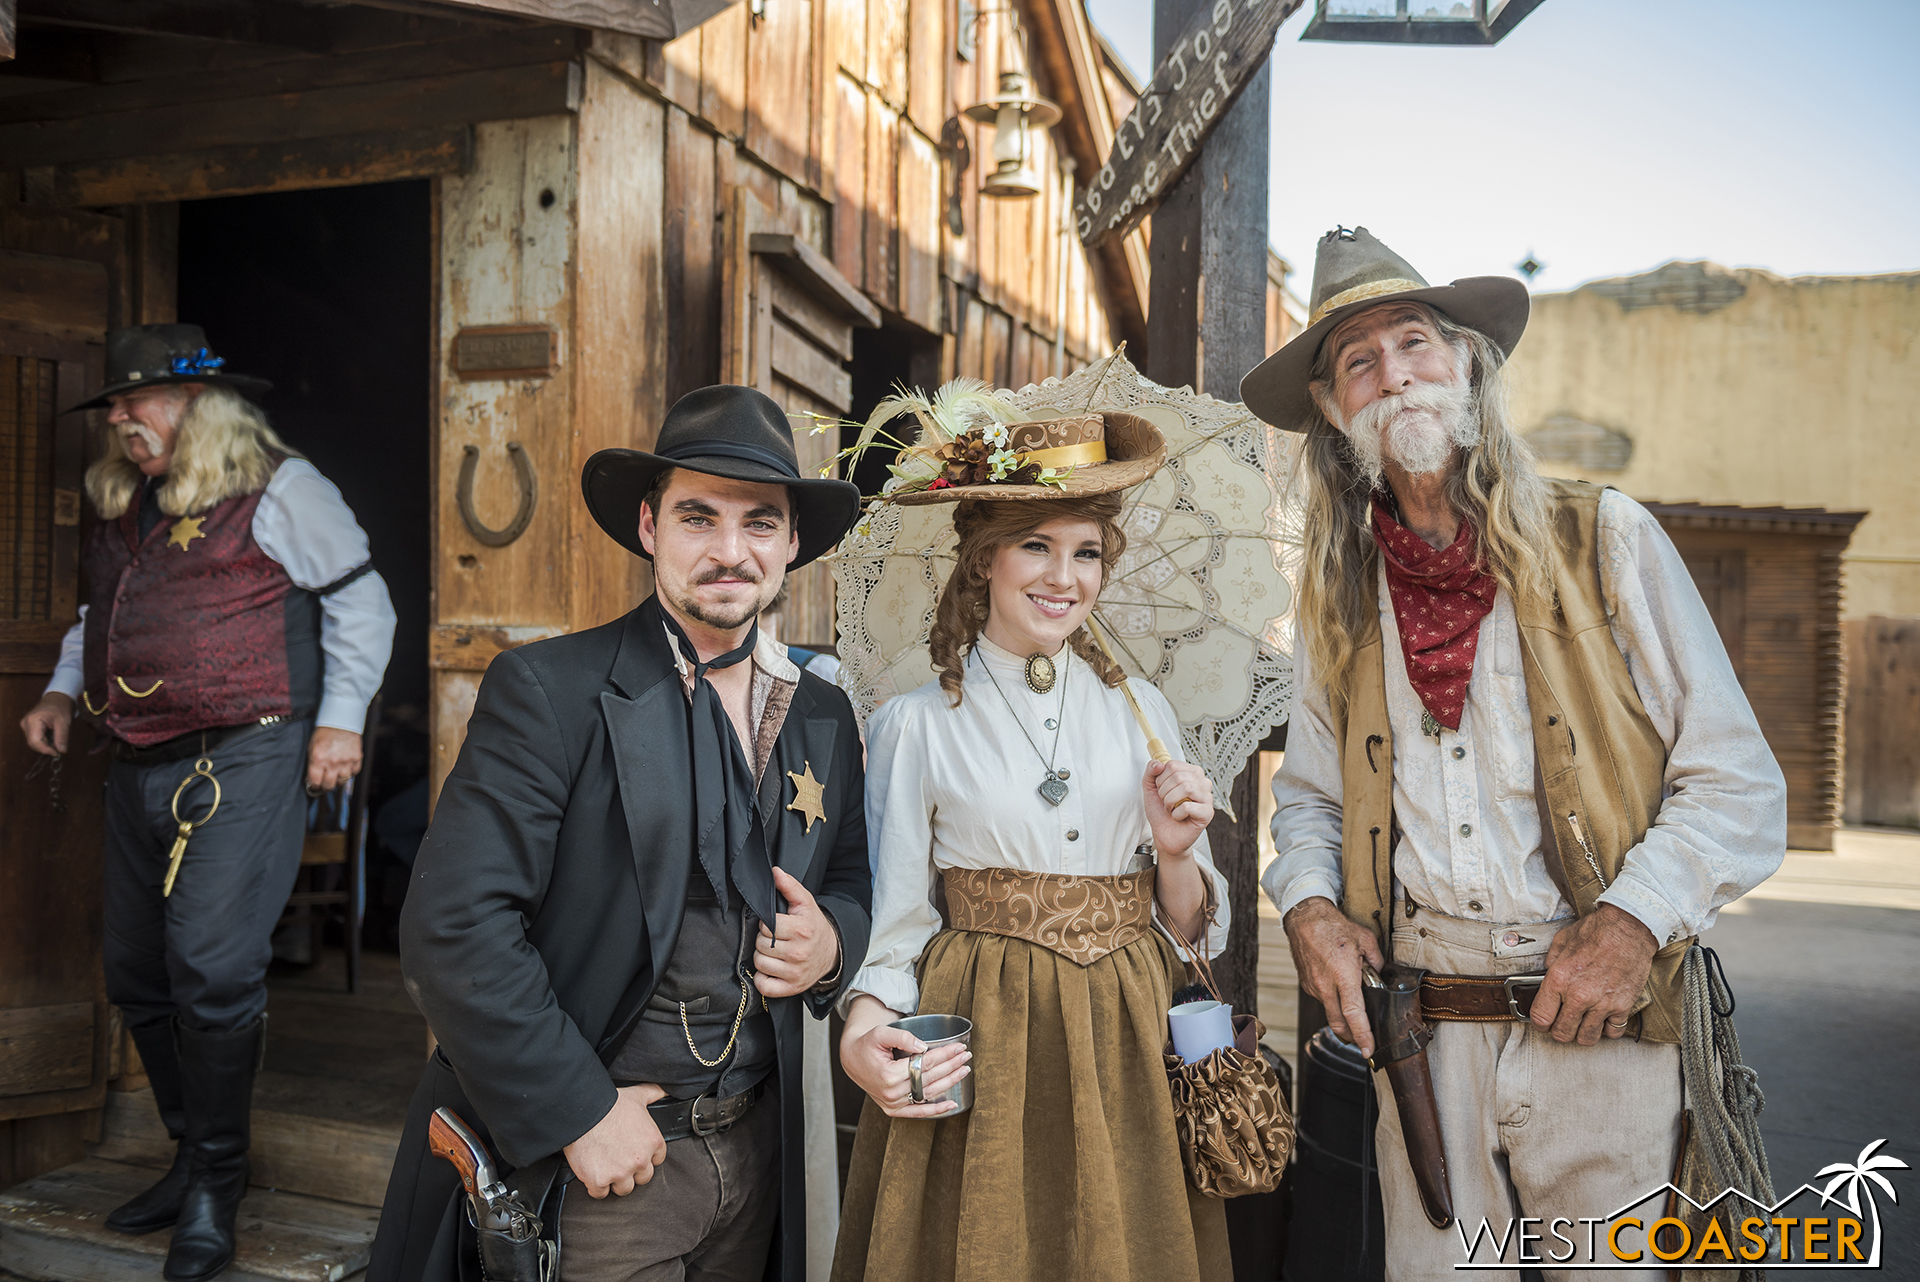  With the Mayfield Gang as a whole causing less trouble this year than usual, Deputy Luke, Goldie’s Place manager, Violet Lee, and Ike Mayfield are able to pose together for a photo. 